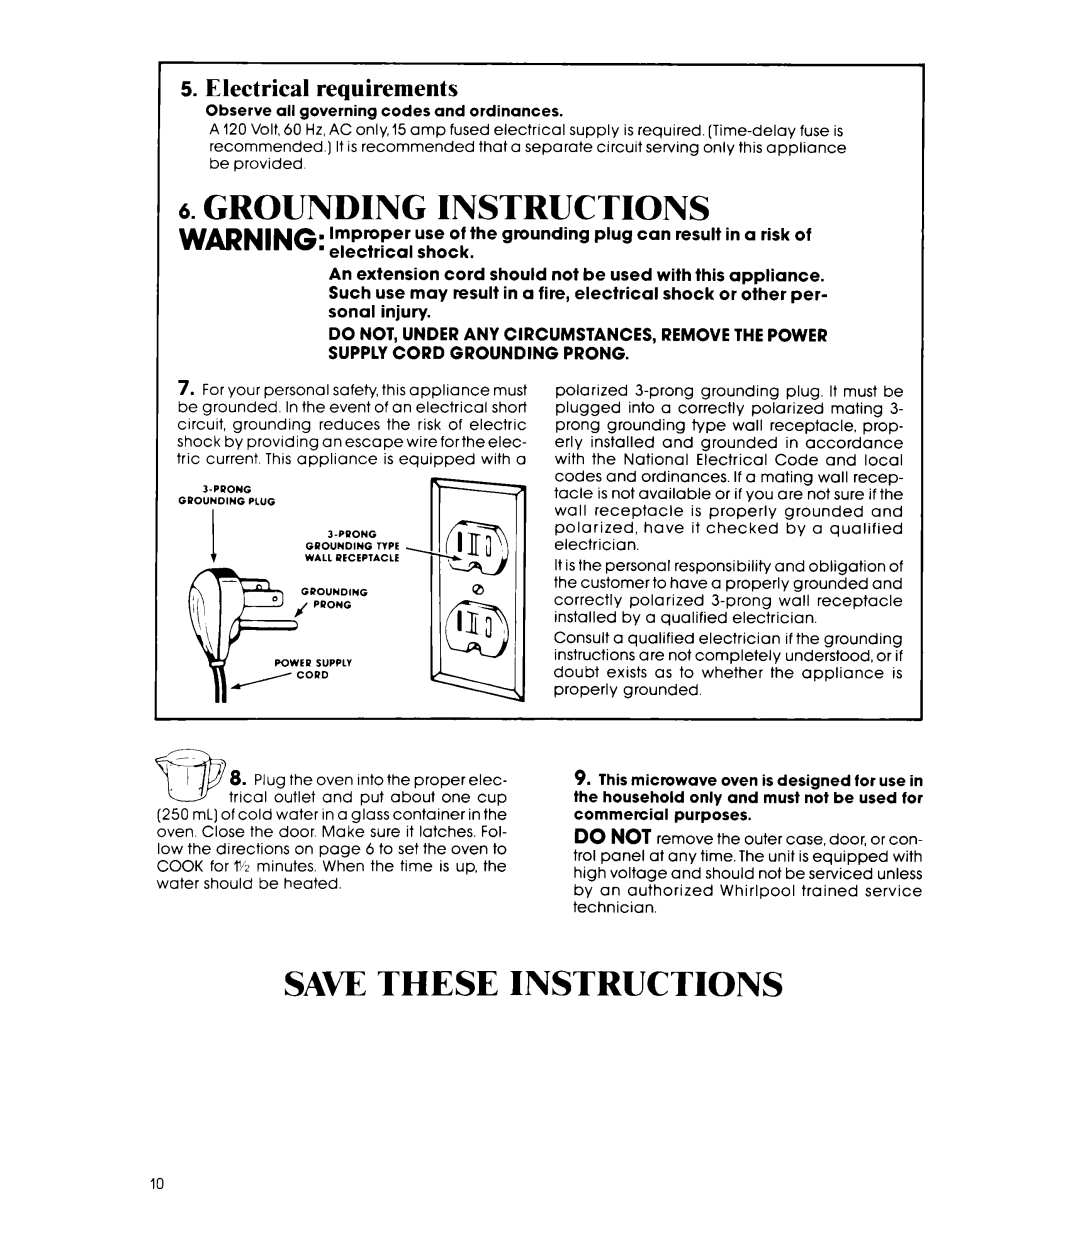 Whirlpool MW81OOXP manual Grounding Instructions, Saw These Instructions, Electrical requirements 